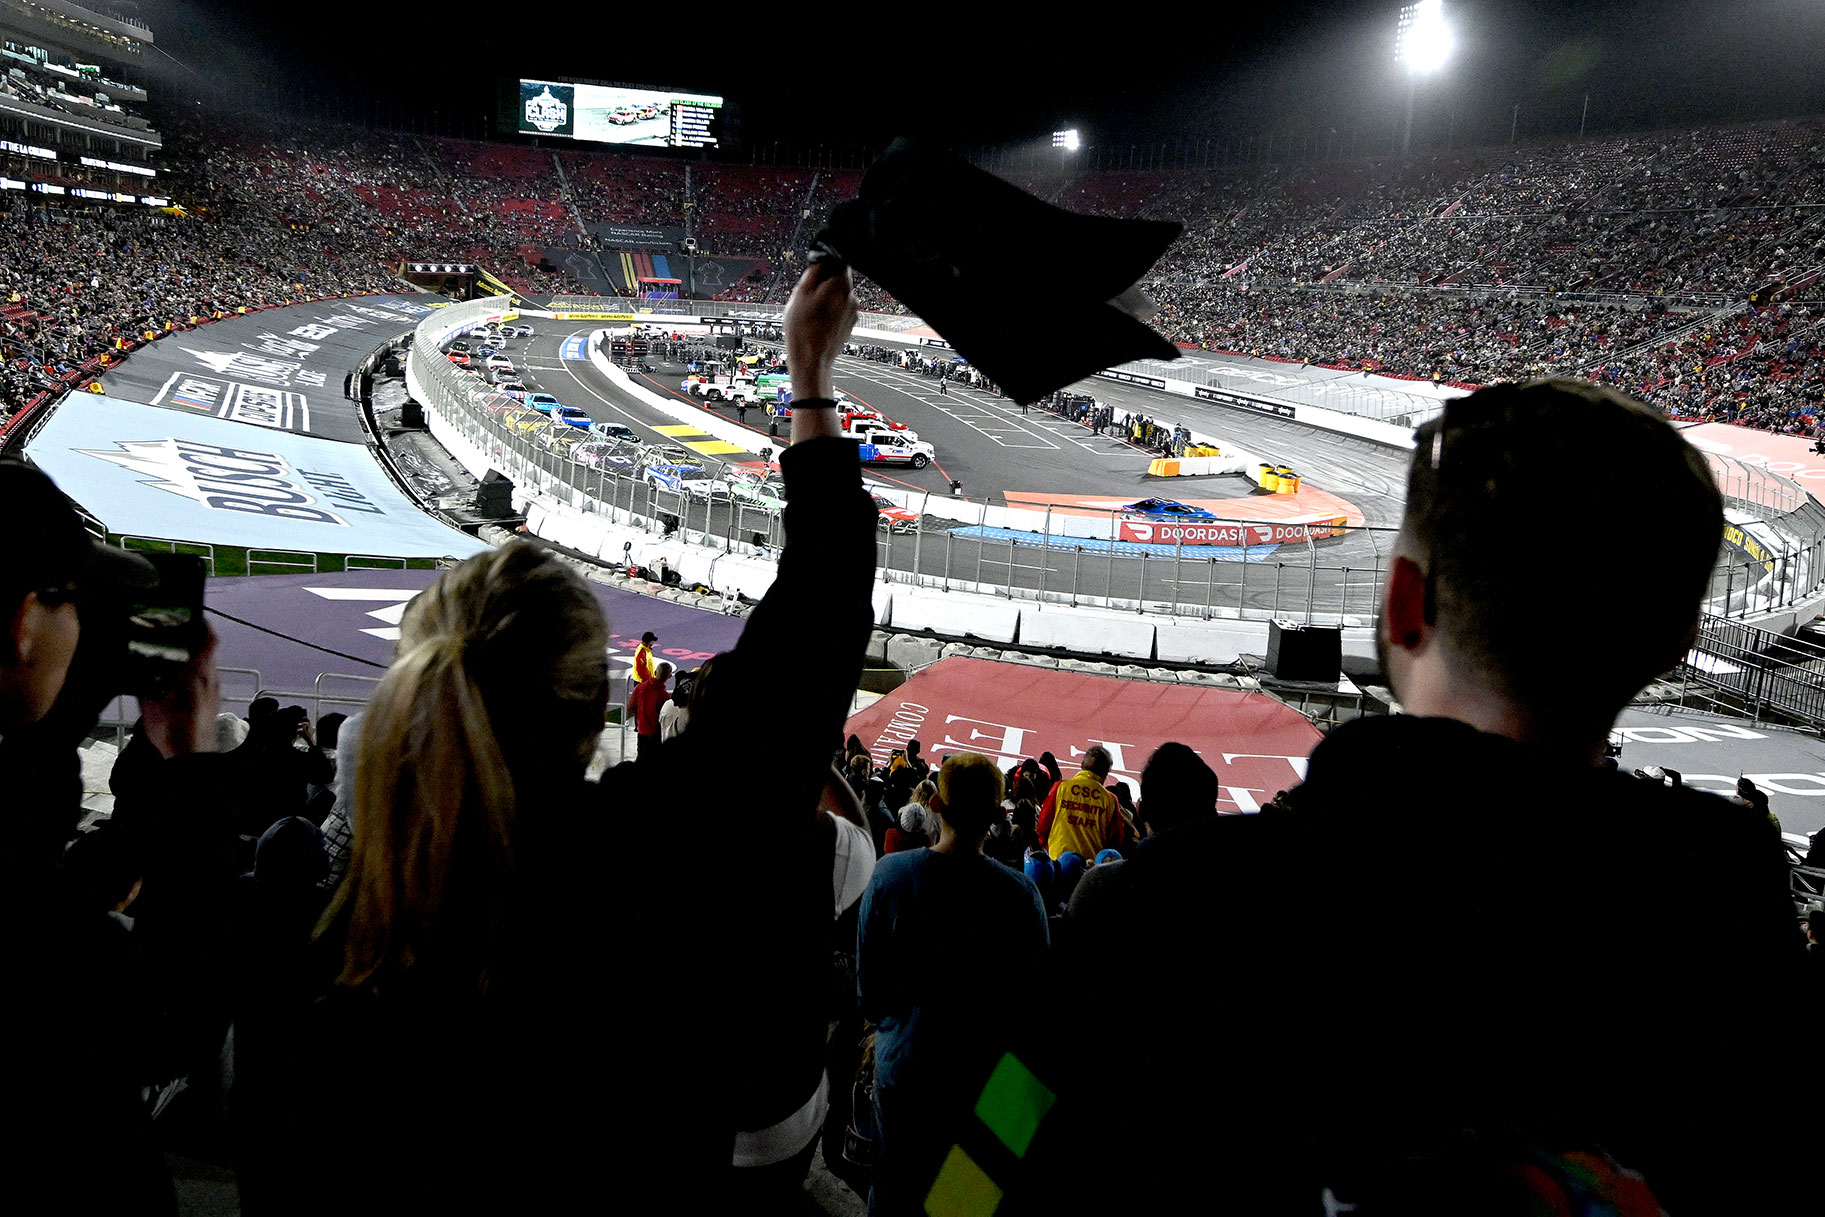 Crowd cheering during a nascar race